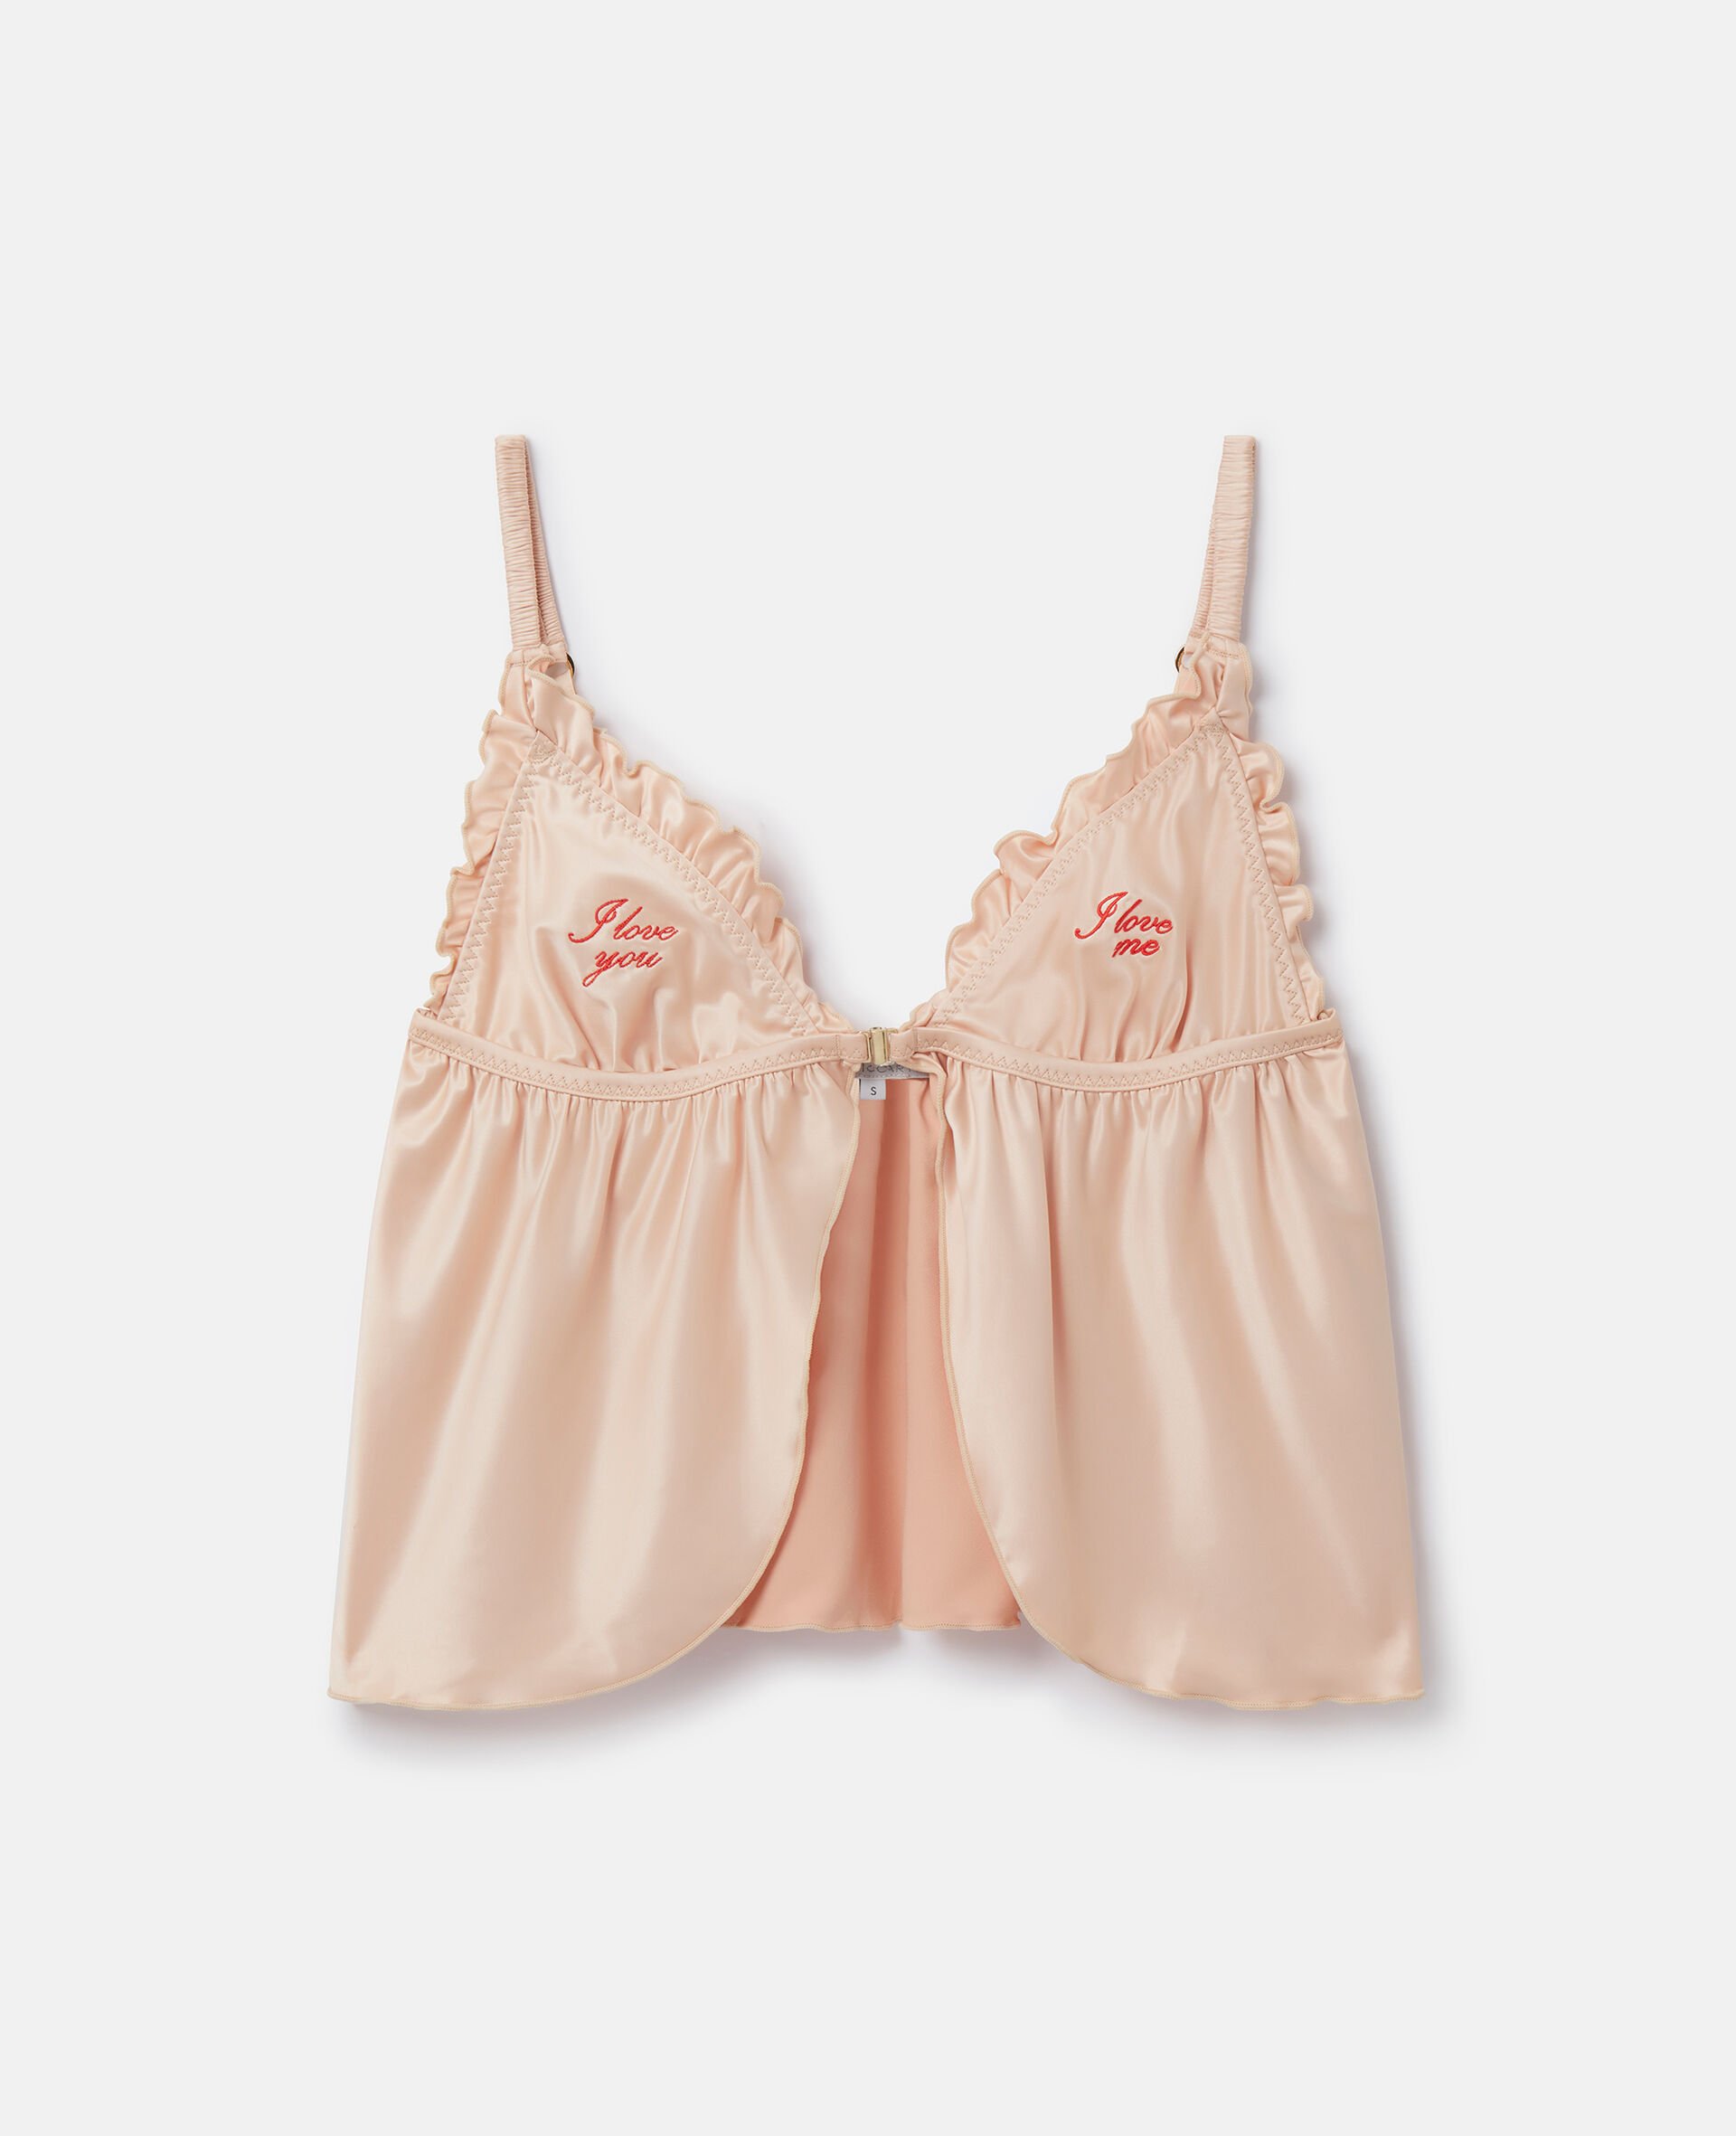 'Love You' Embroidery Satin Flounce Camisole-Beige-large image number 0